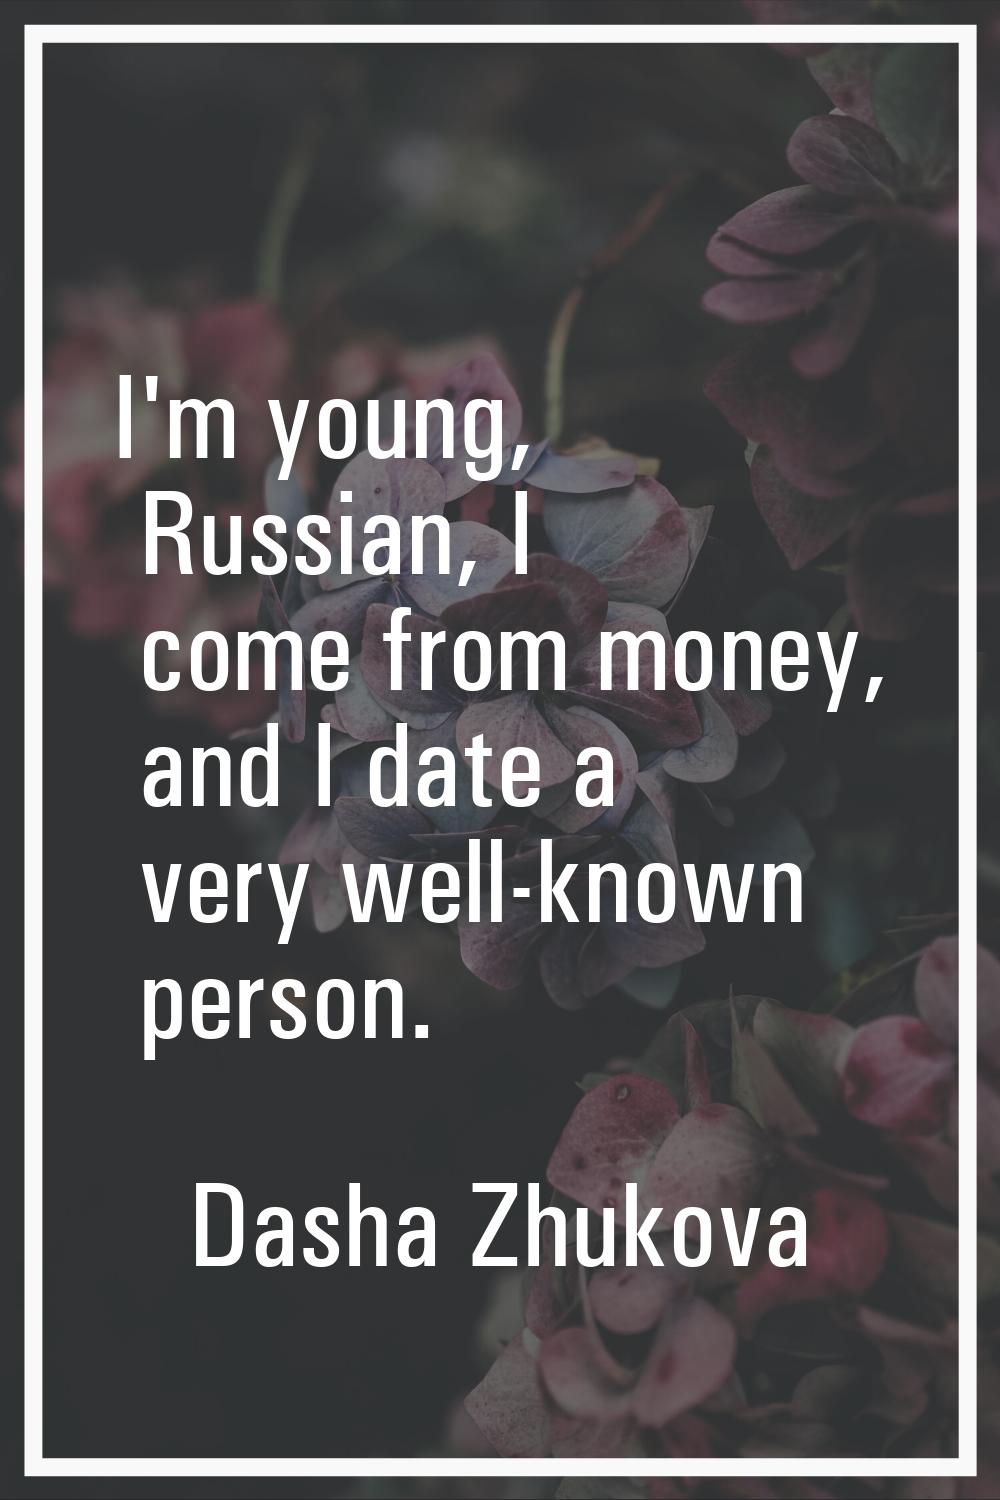 I'm young, Russian, I come from money, and I date a very well-known person.